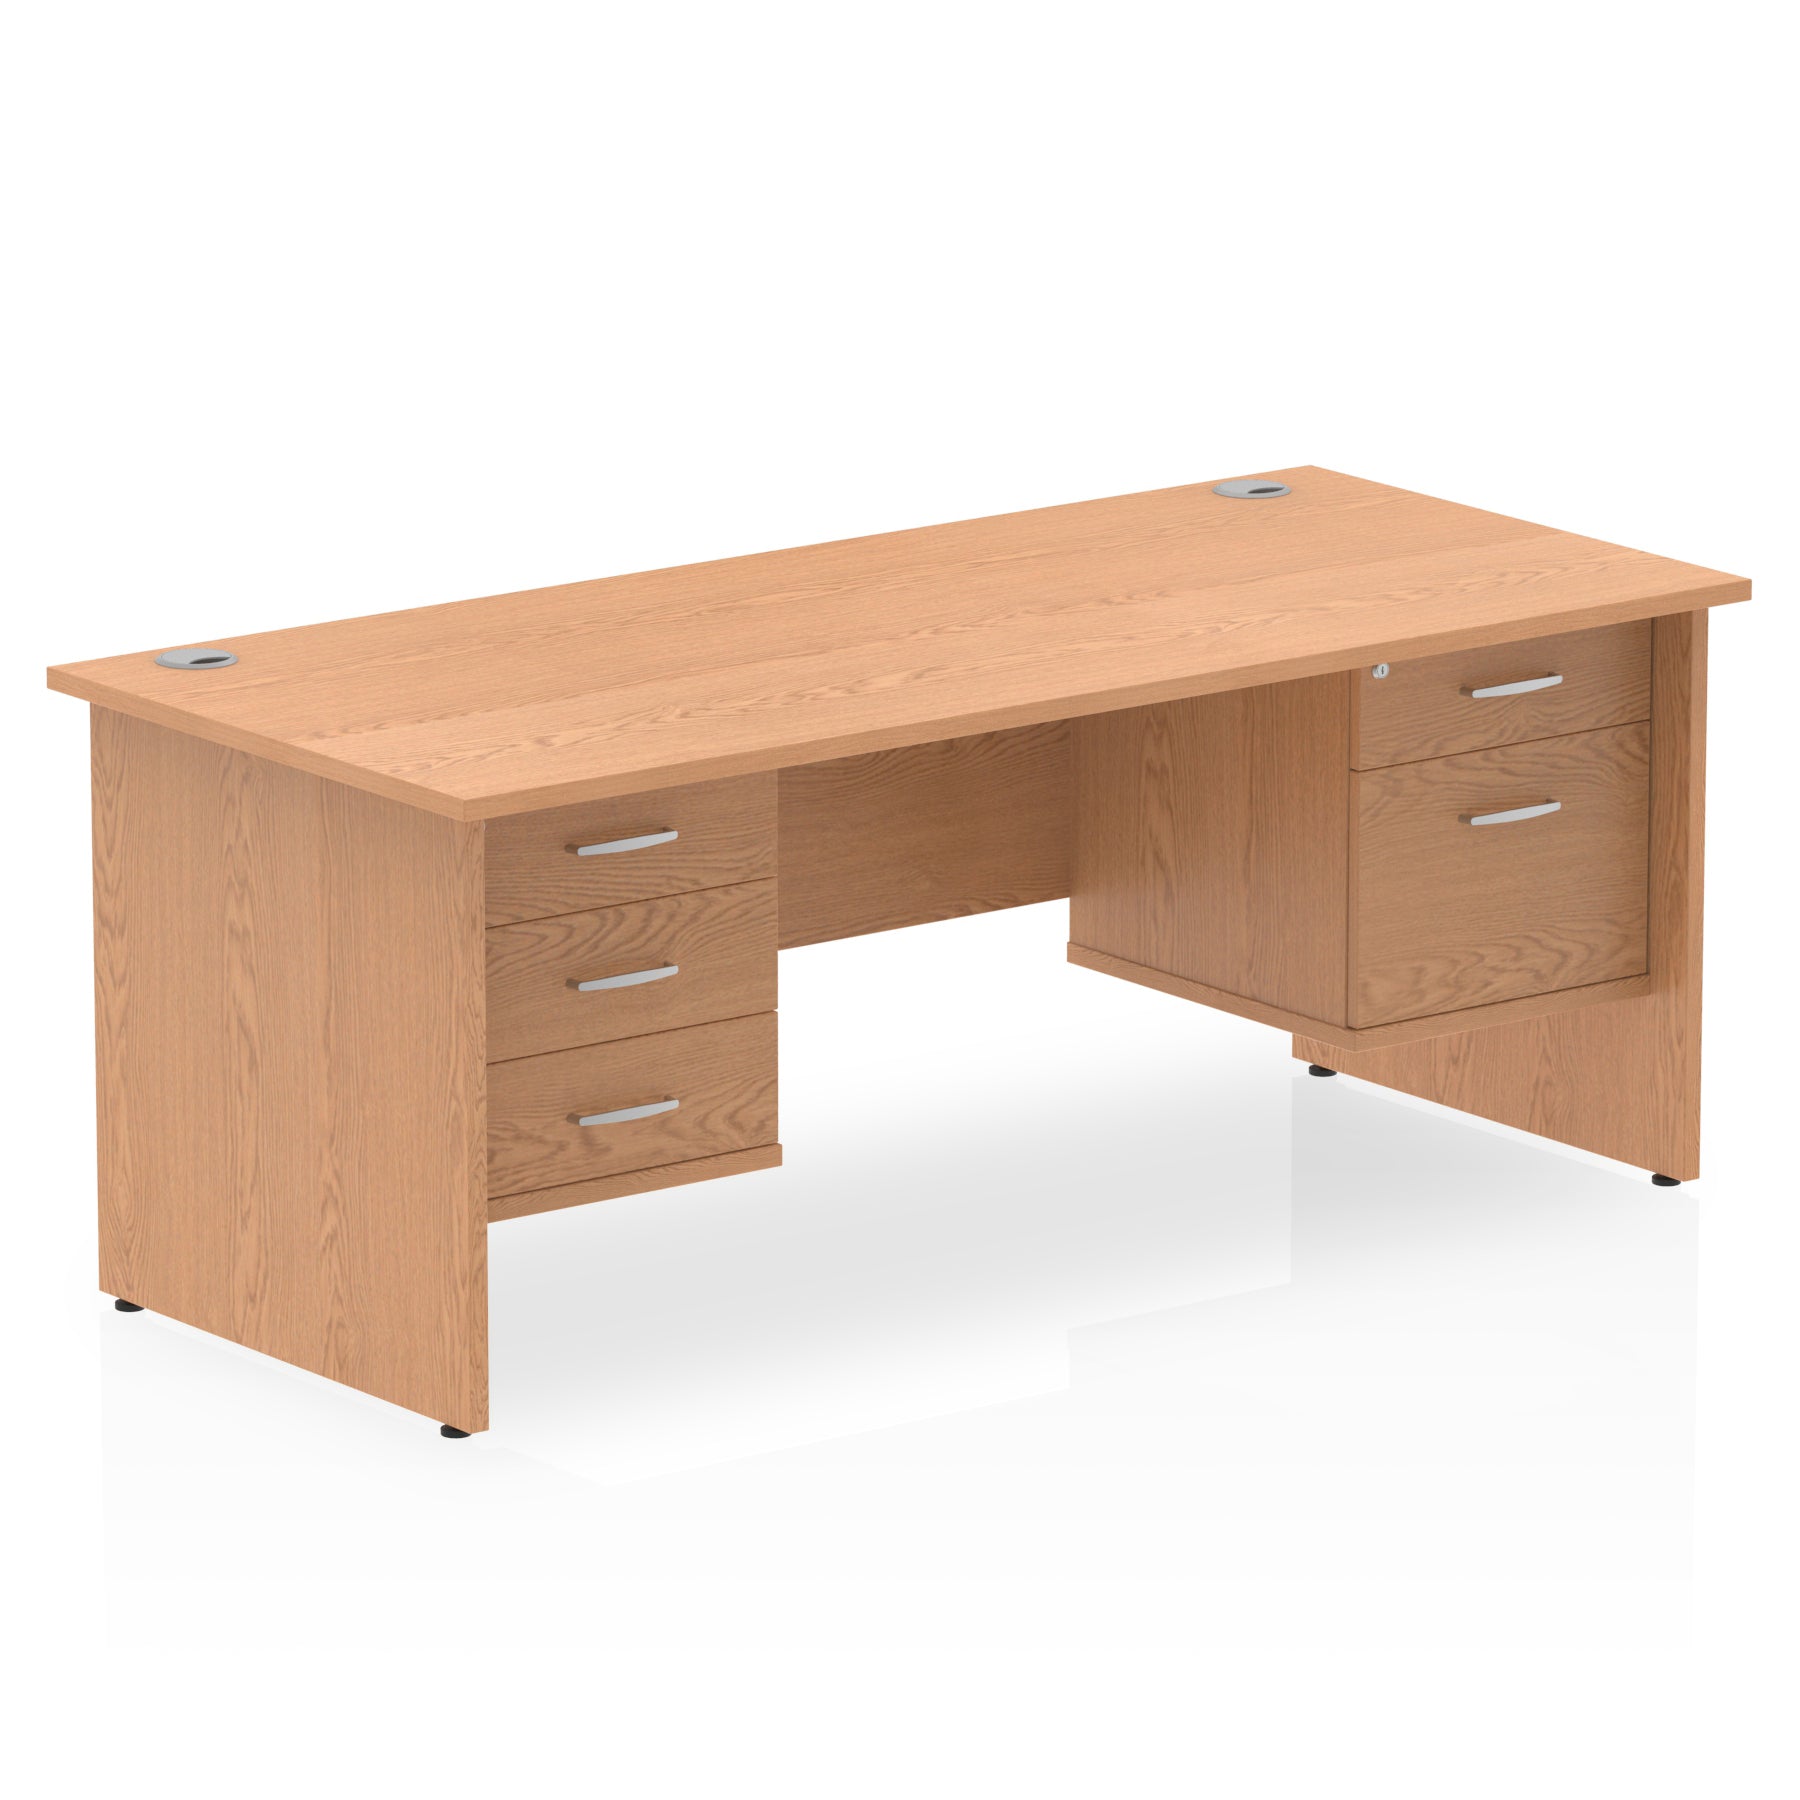 Dynasty Freestanding 1200mm Rectangular Desk With Fixed Pedestal | Heat Resistant Melamine Finish & Cable Management